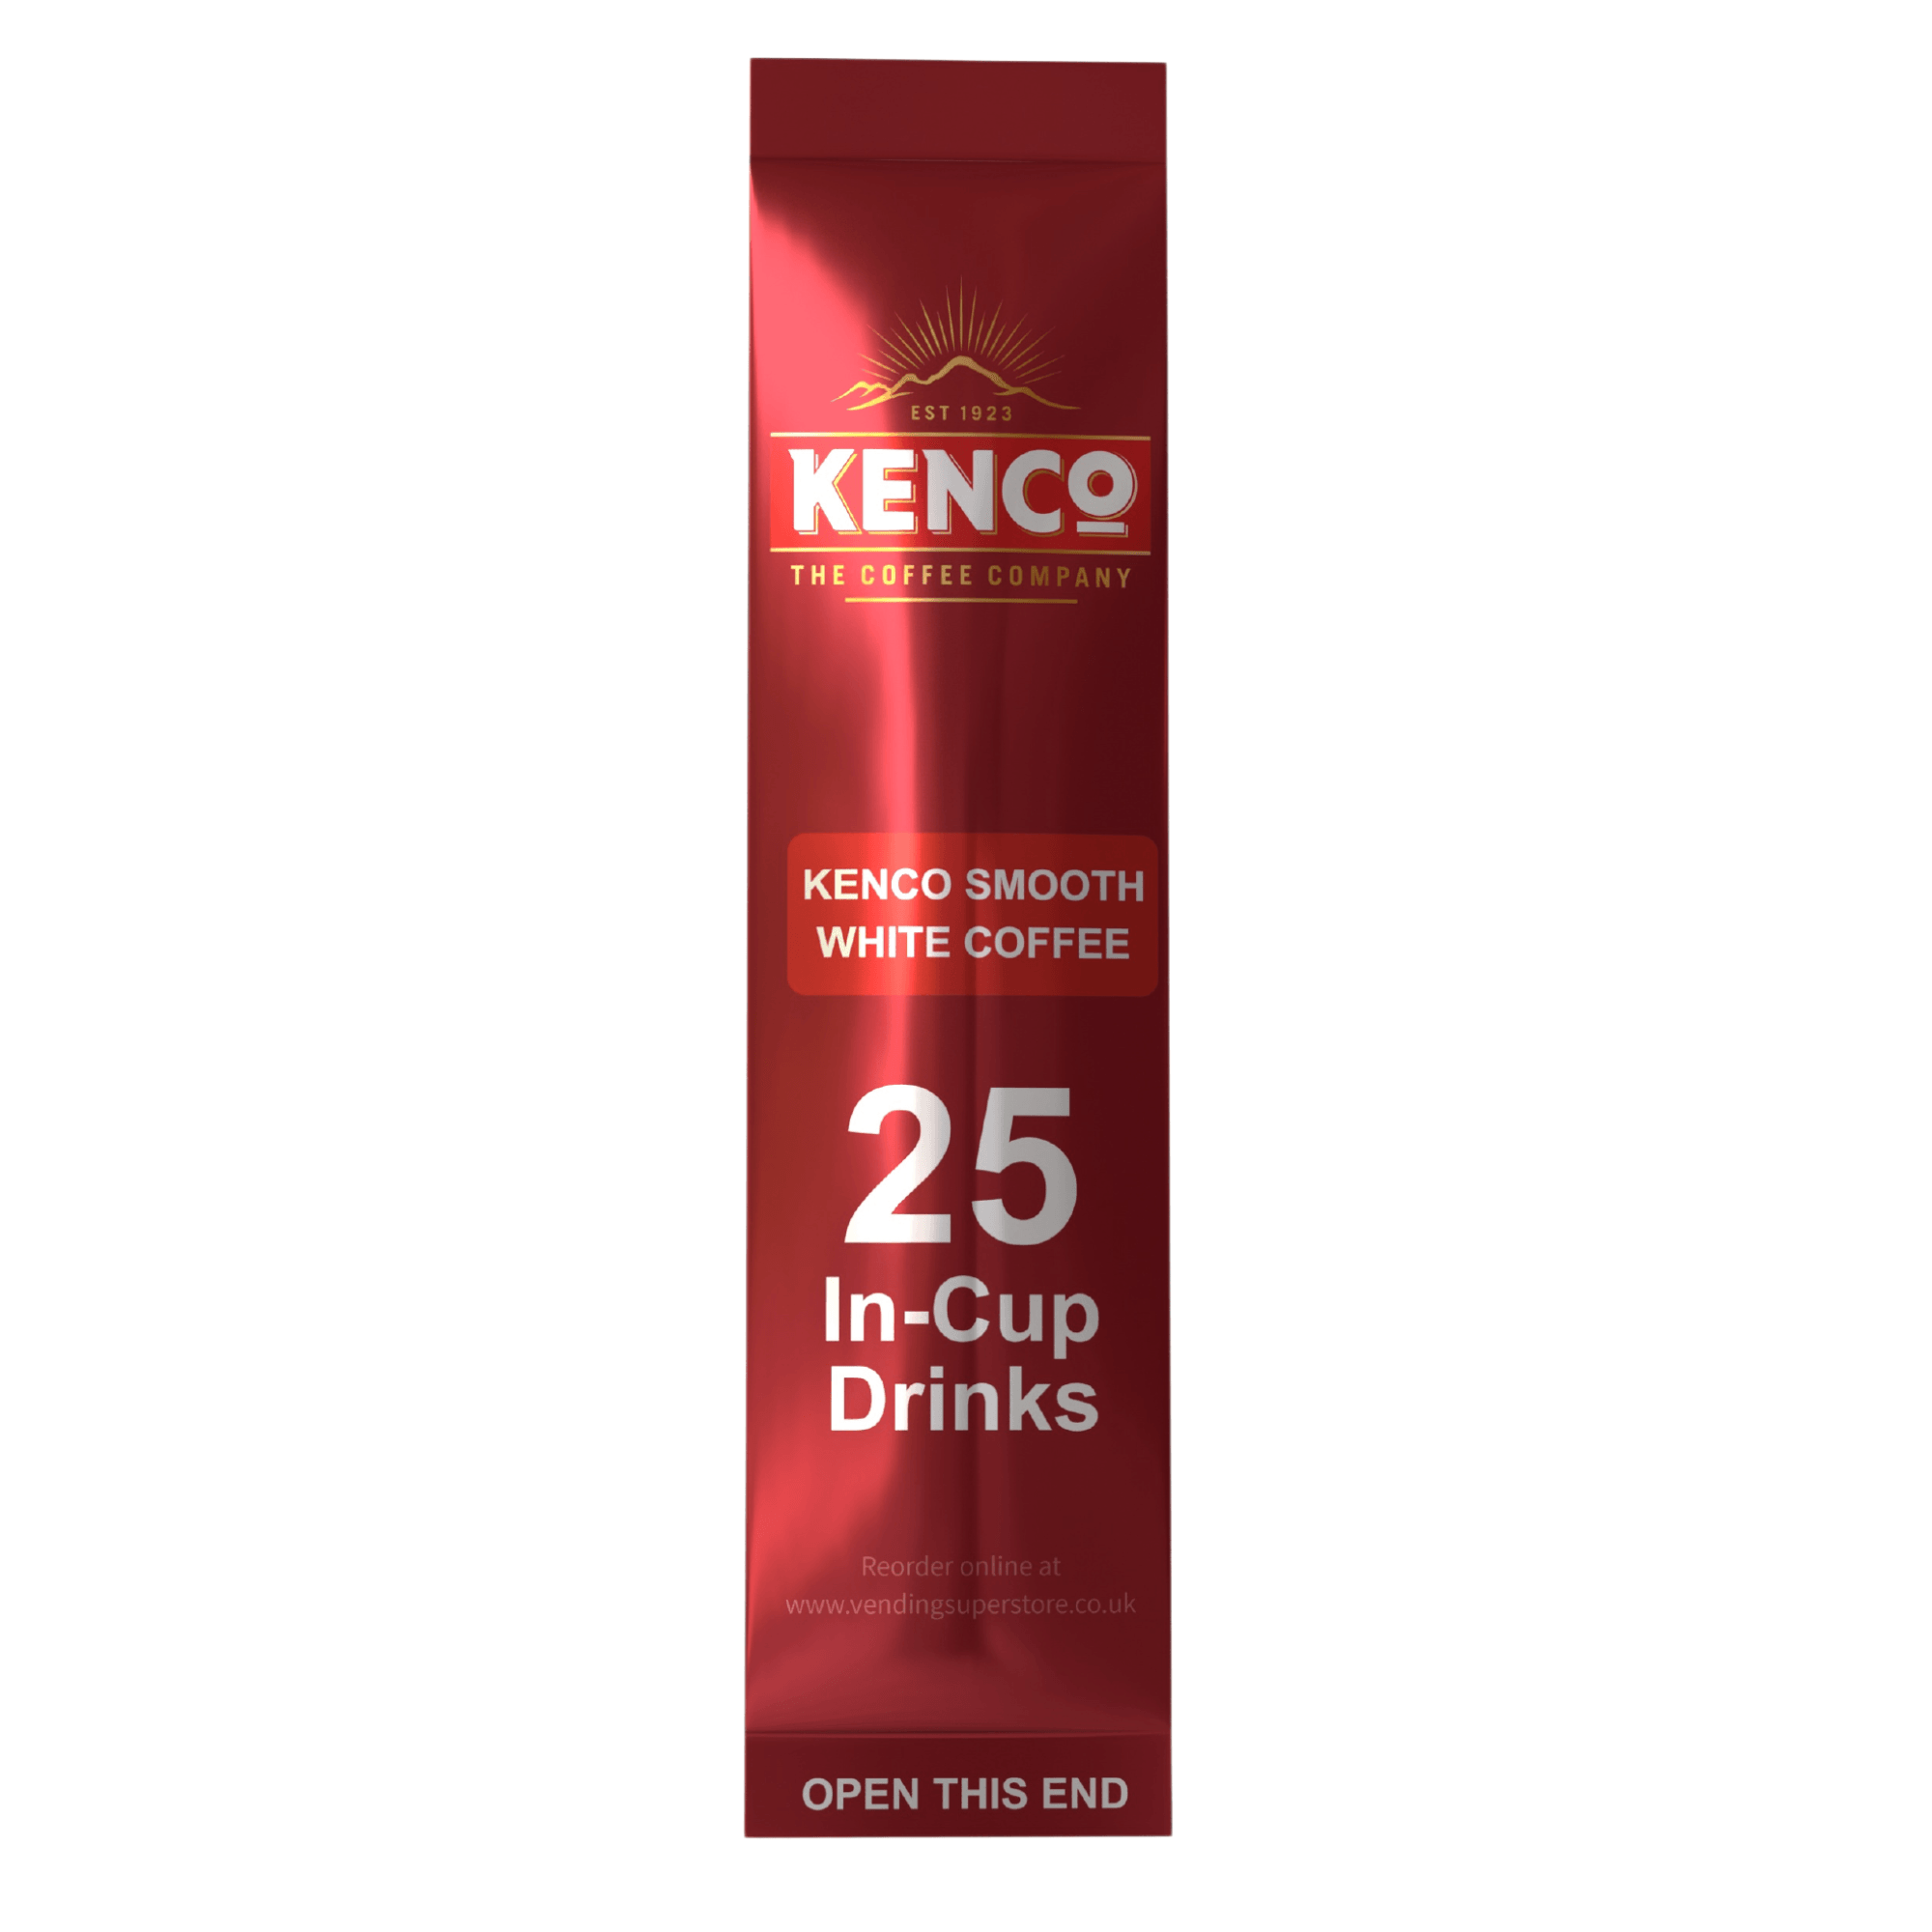 Incup Vending Drinks - Kenco Smooth White Coffee - Sleeve of 25 Cups - Vending Superstore